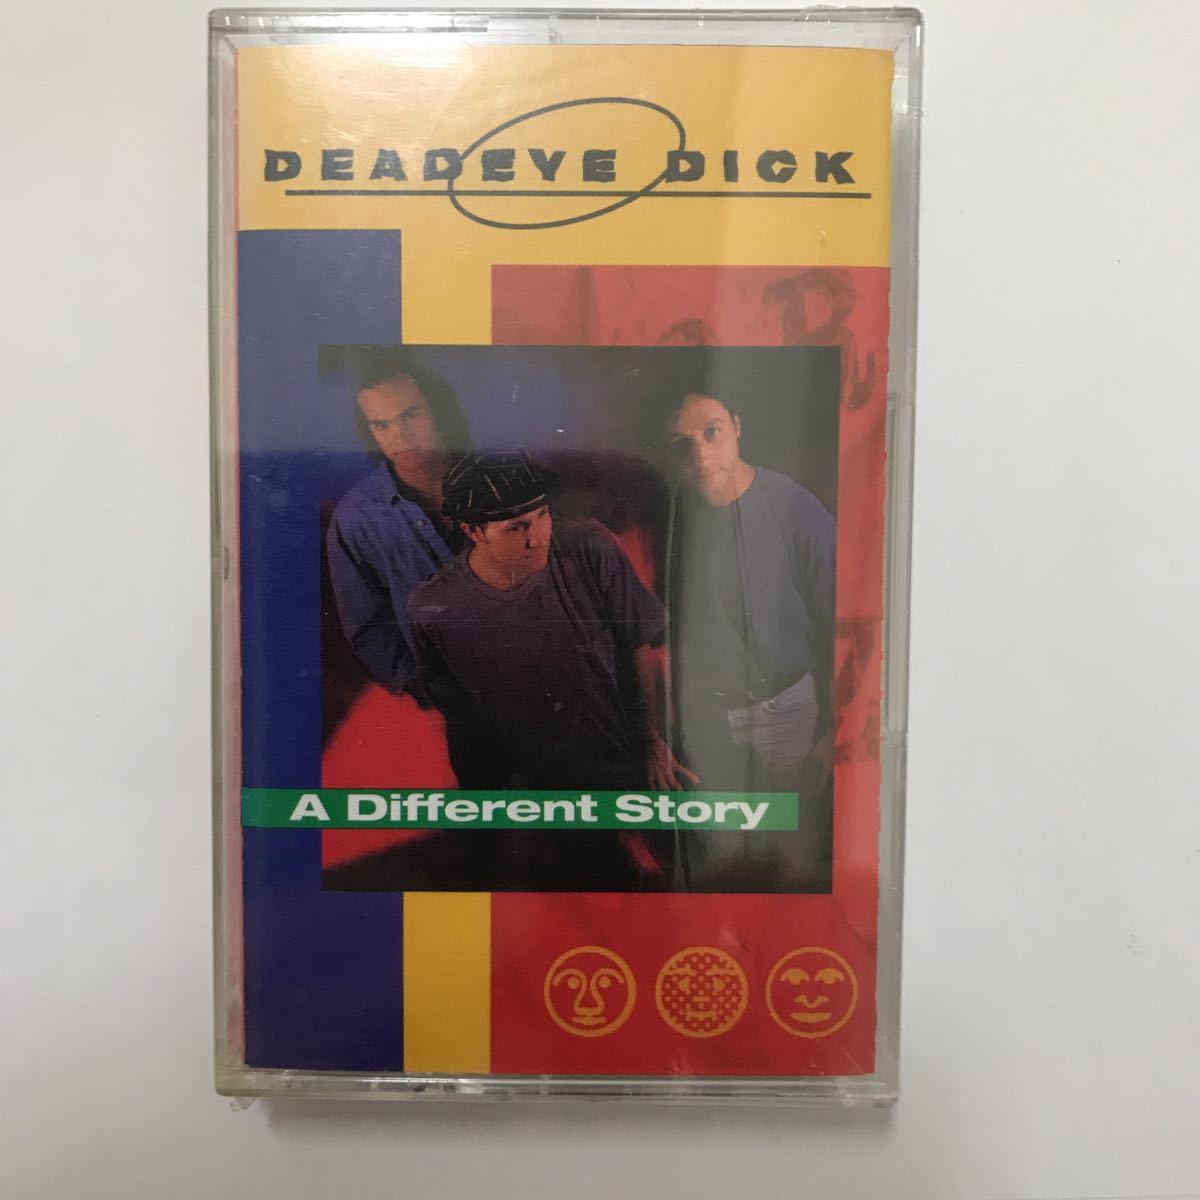  cassette tape * foreign record * western-style music * DEADEYE DICK[a different story